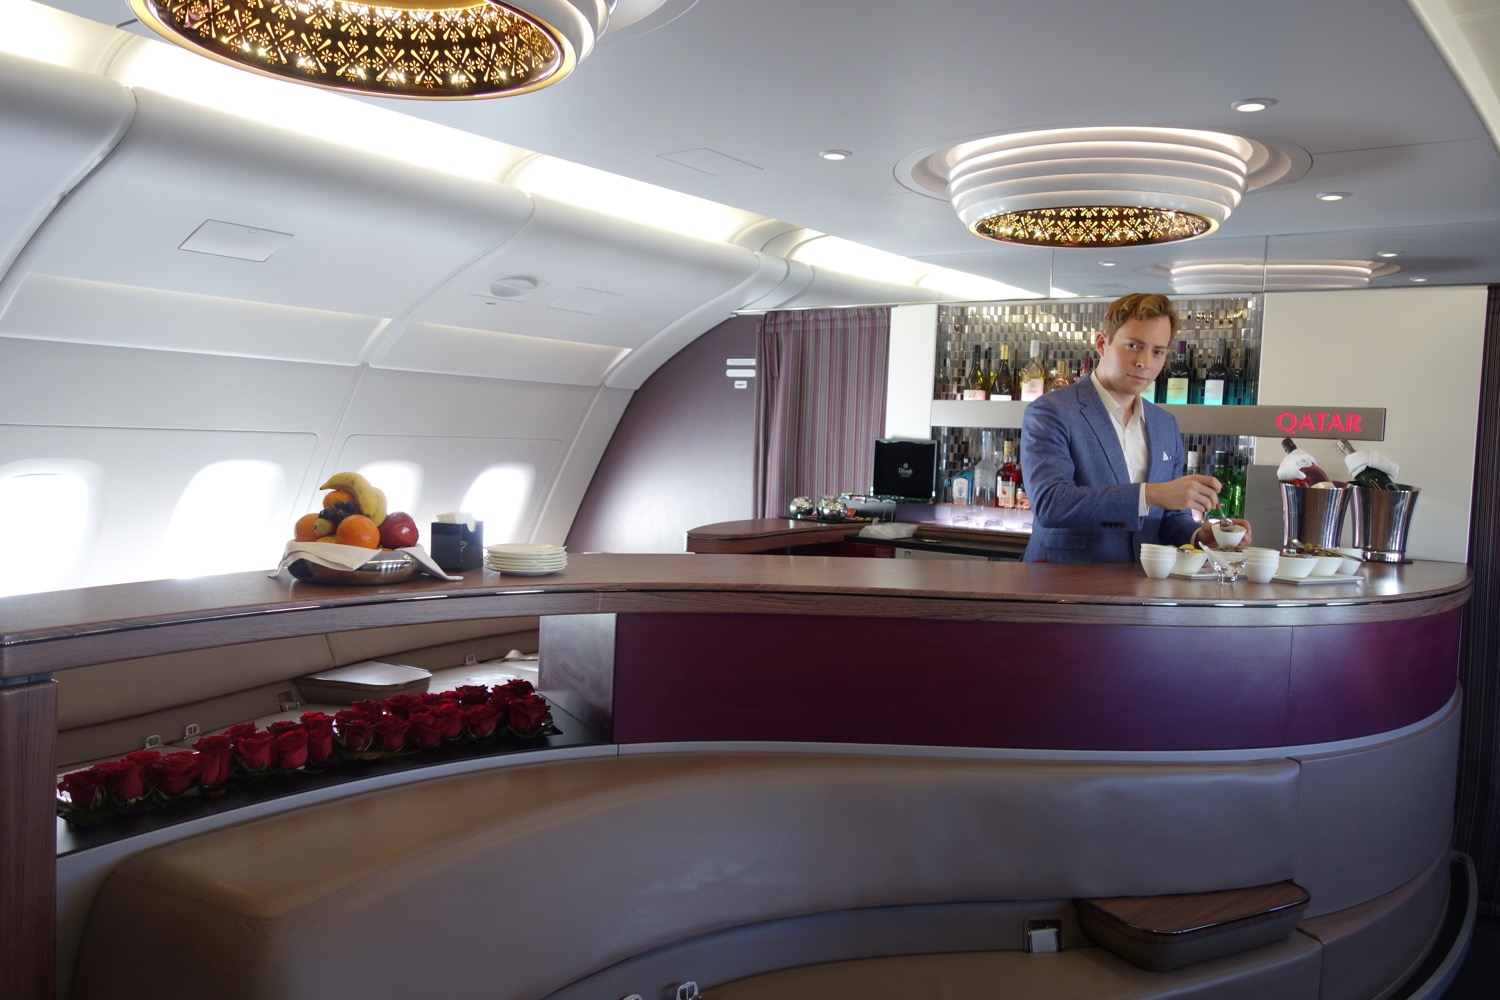 a man standing behind a counter in an airplane